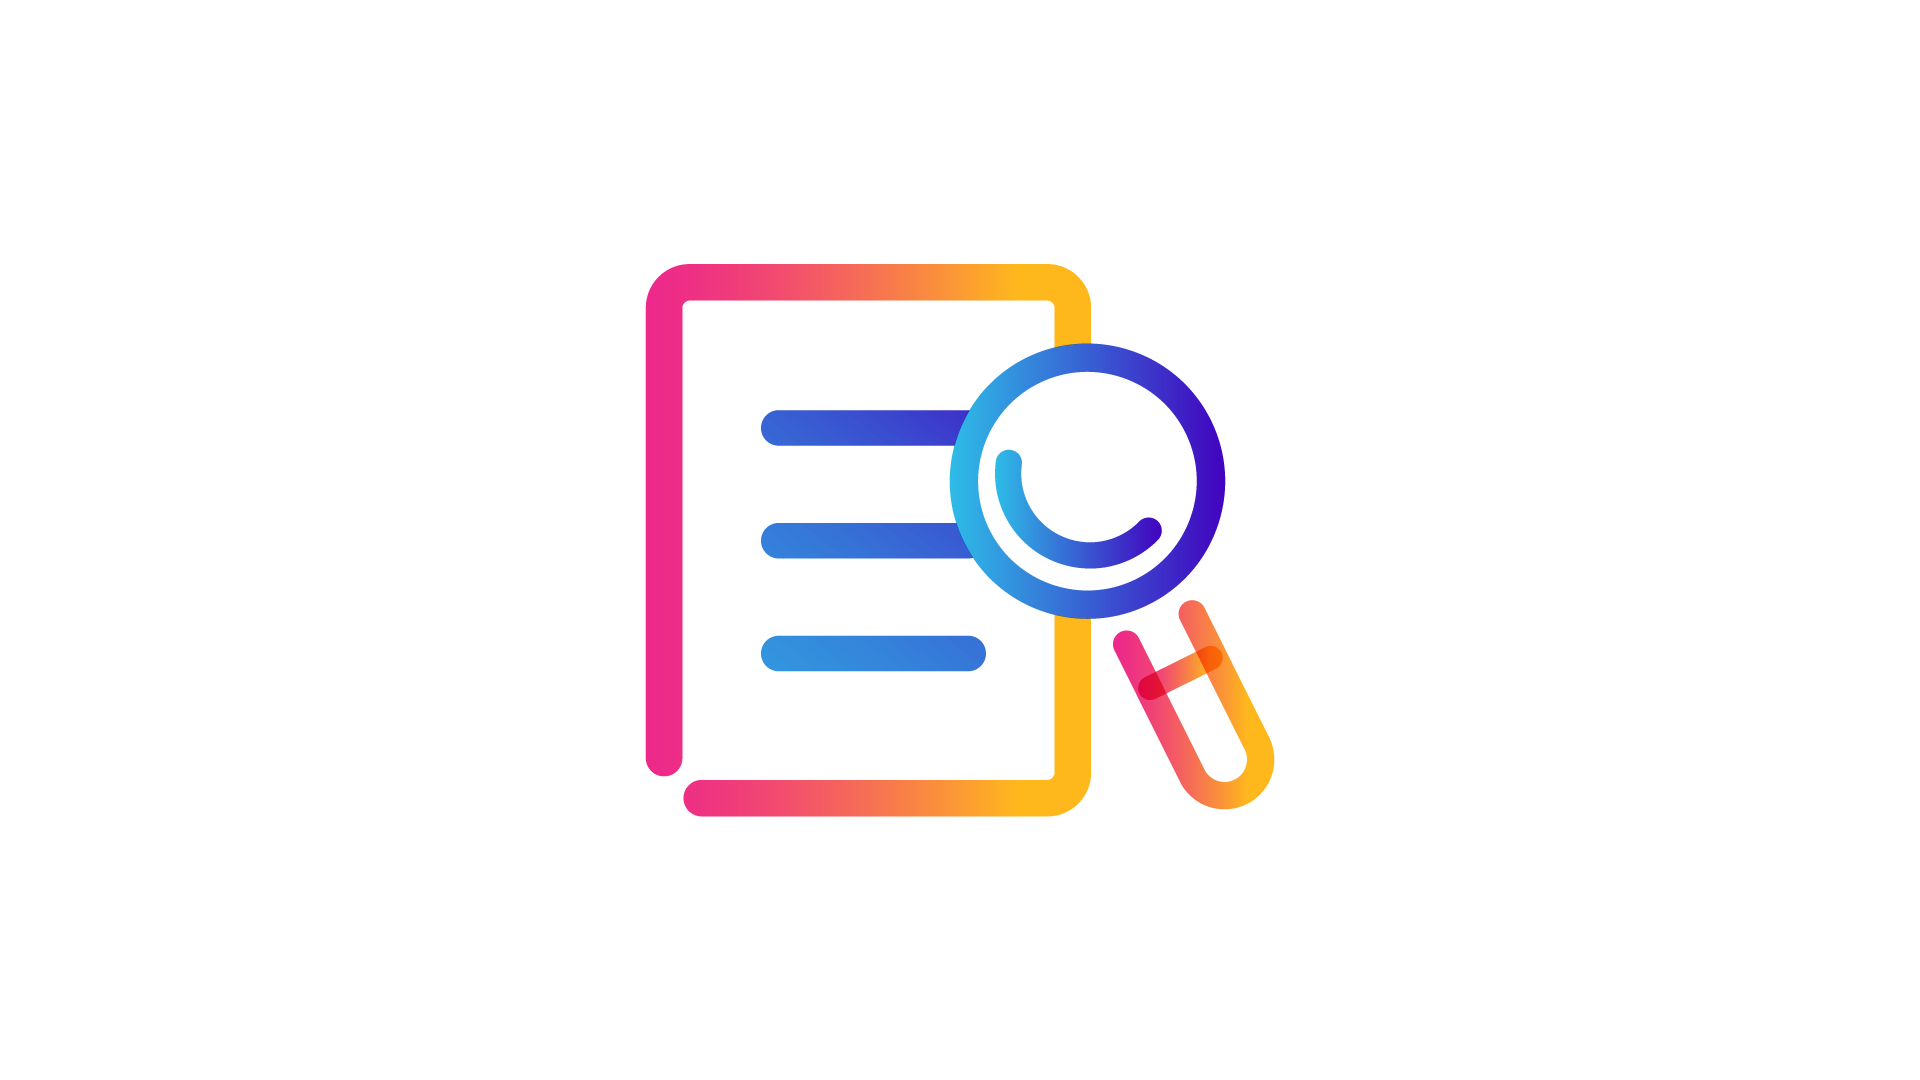 form and magnifying glass icon